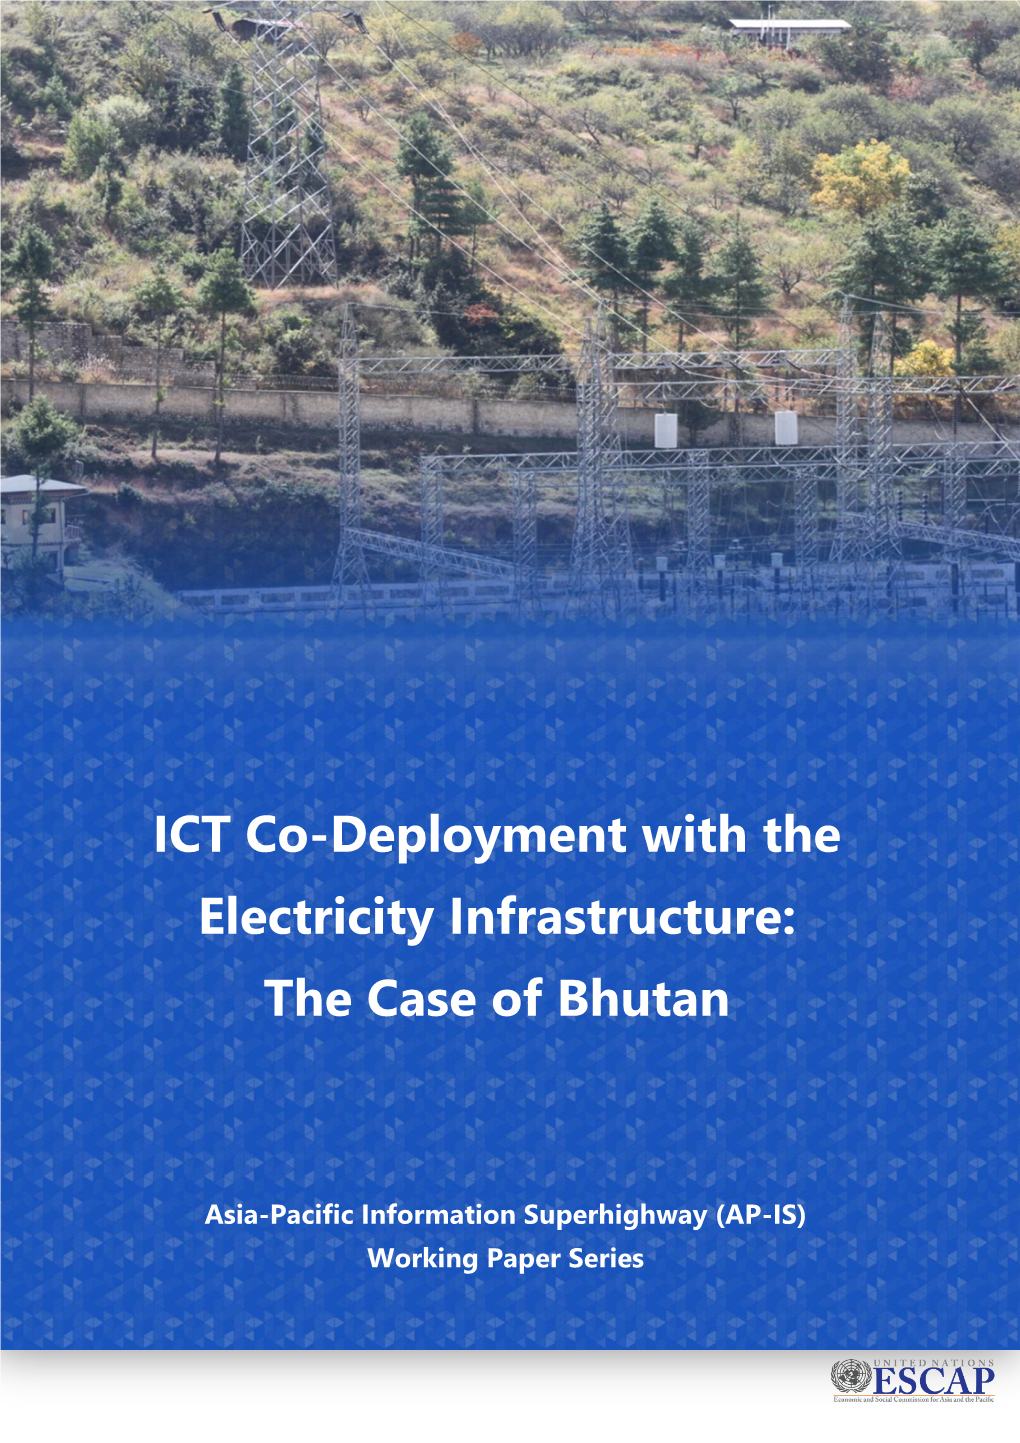 ICT Co-Deployment with the Electricity Infrastructure: the Case of Bhutan